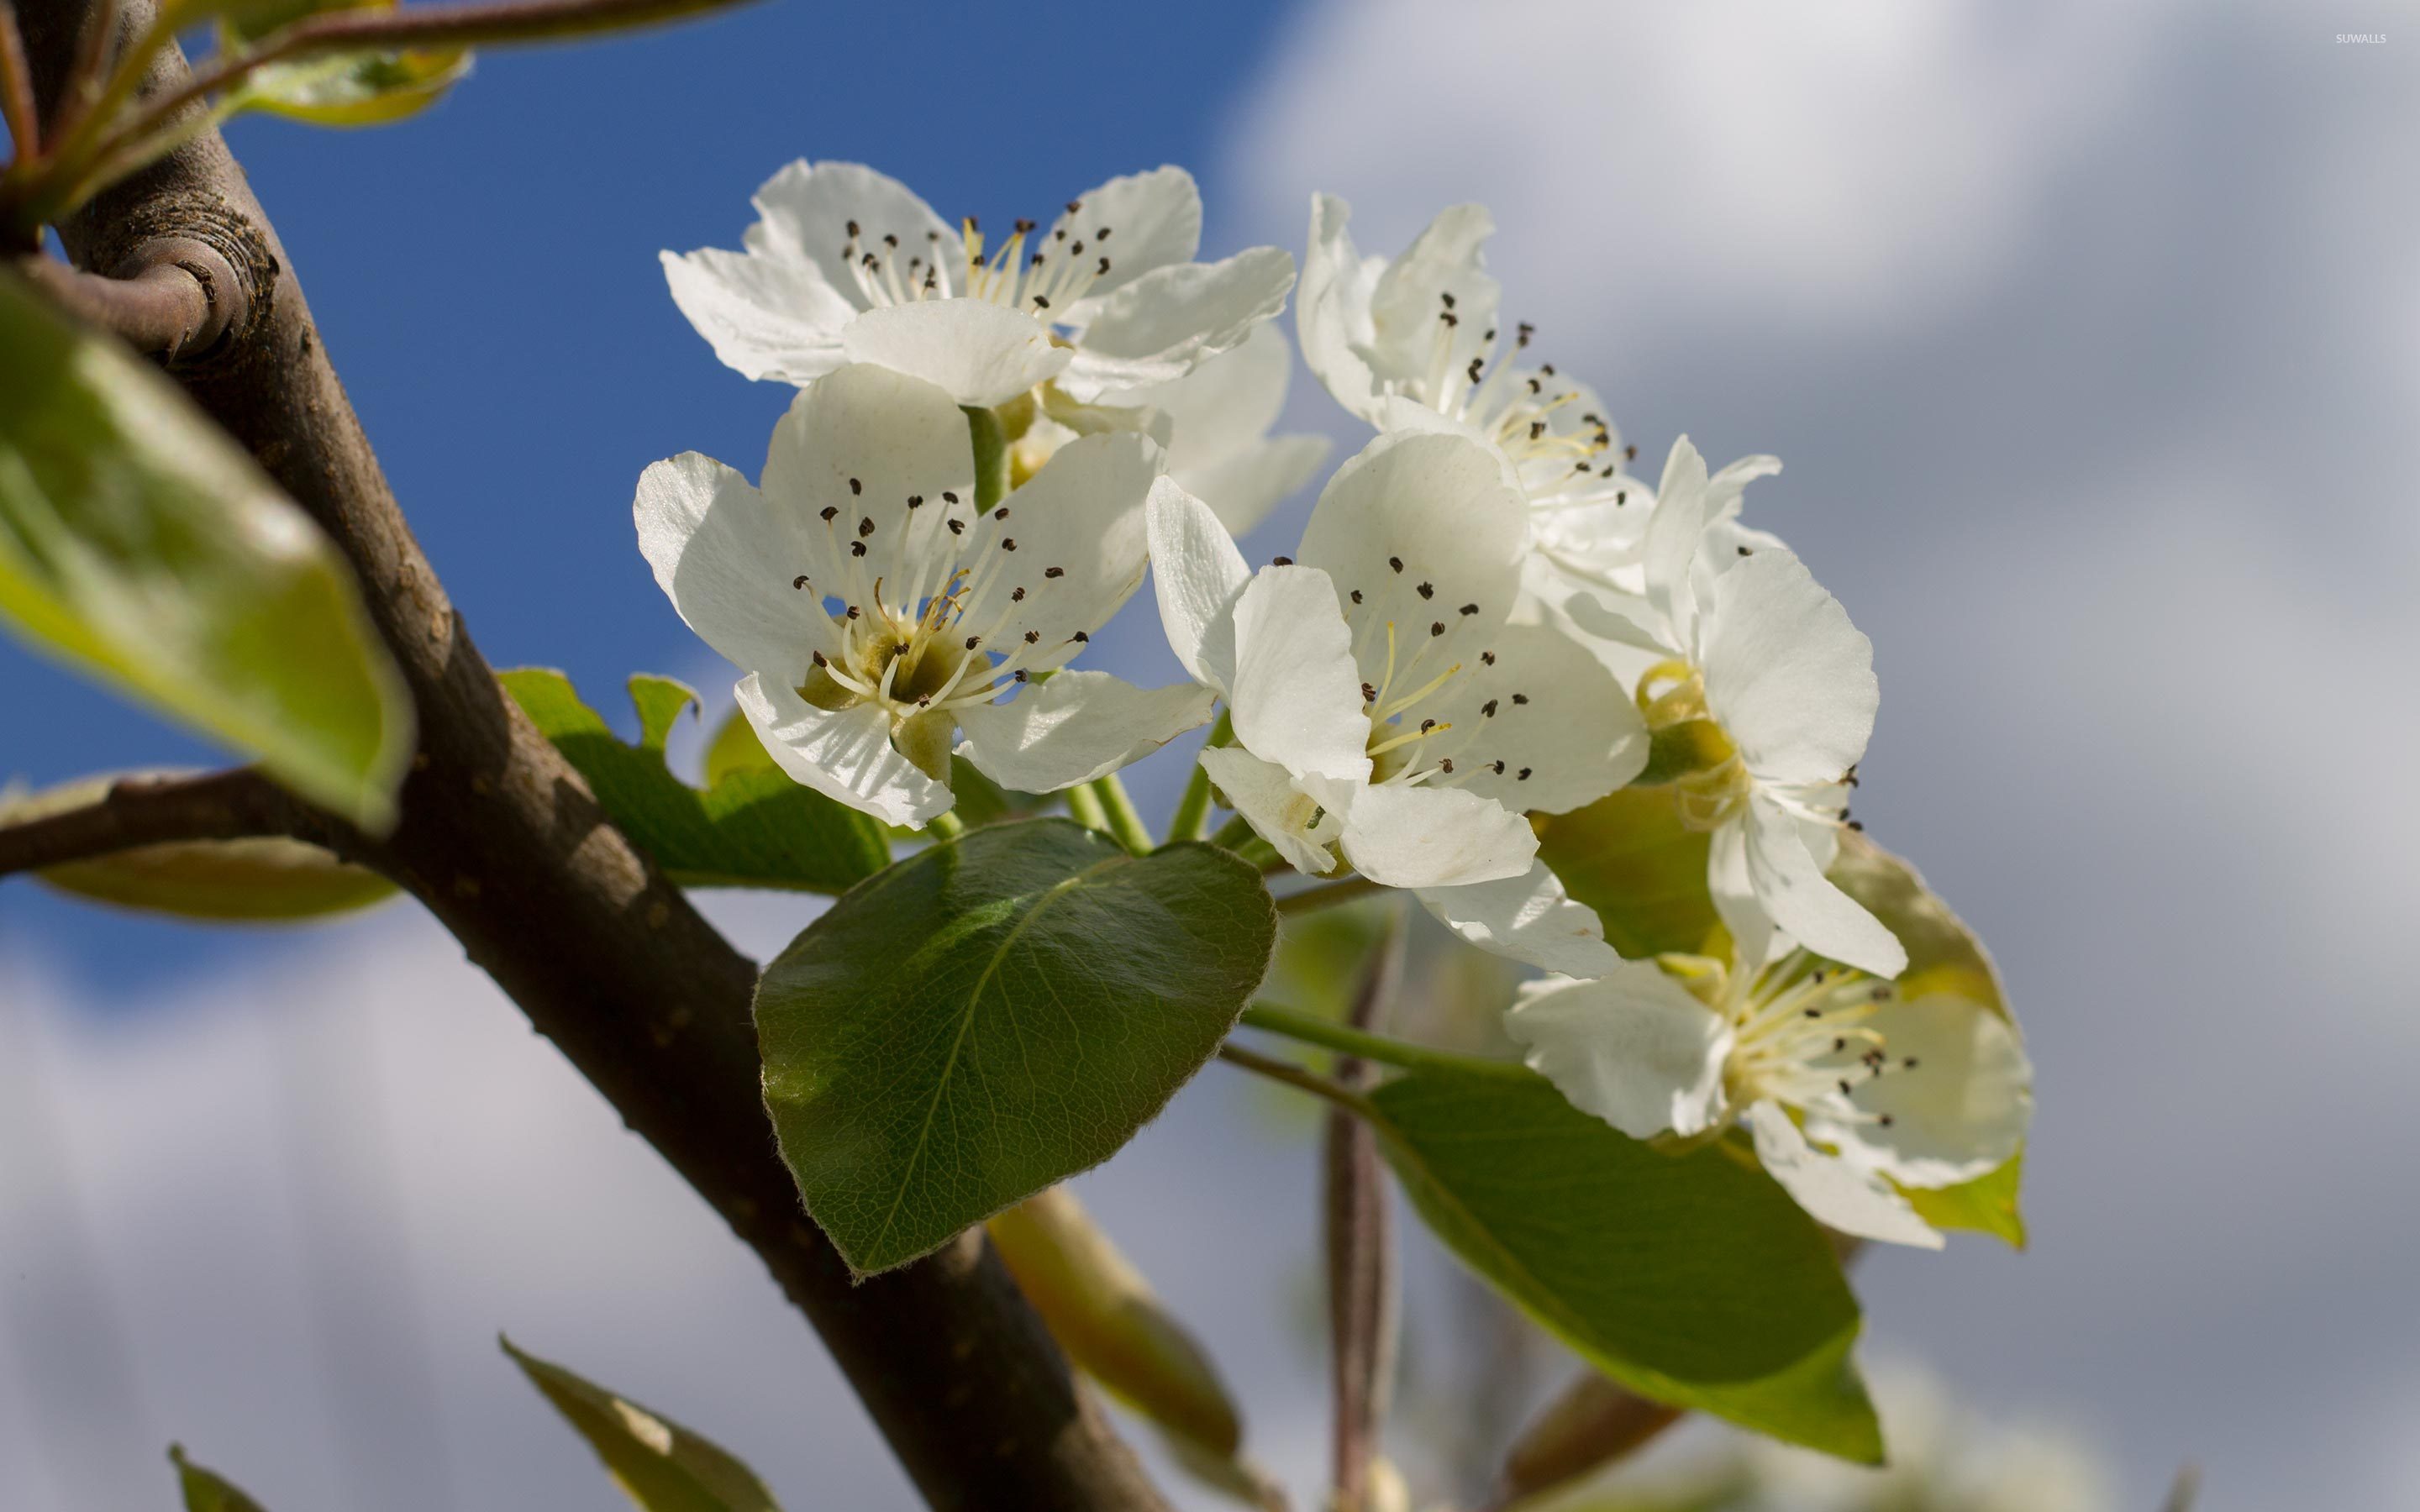 Pear blossoms in the sunshine wallpaper - Flower wallpapers - #51190